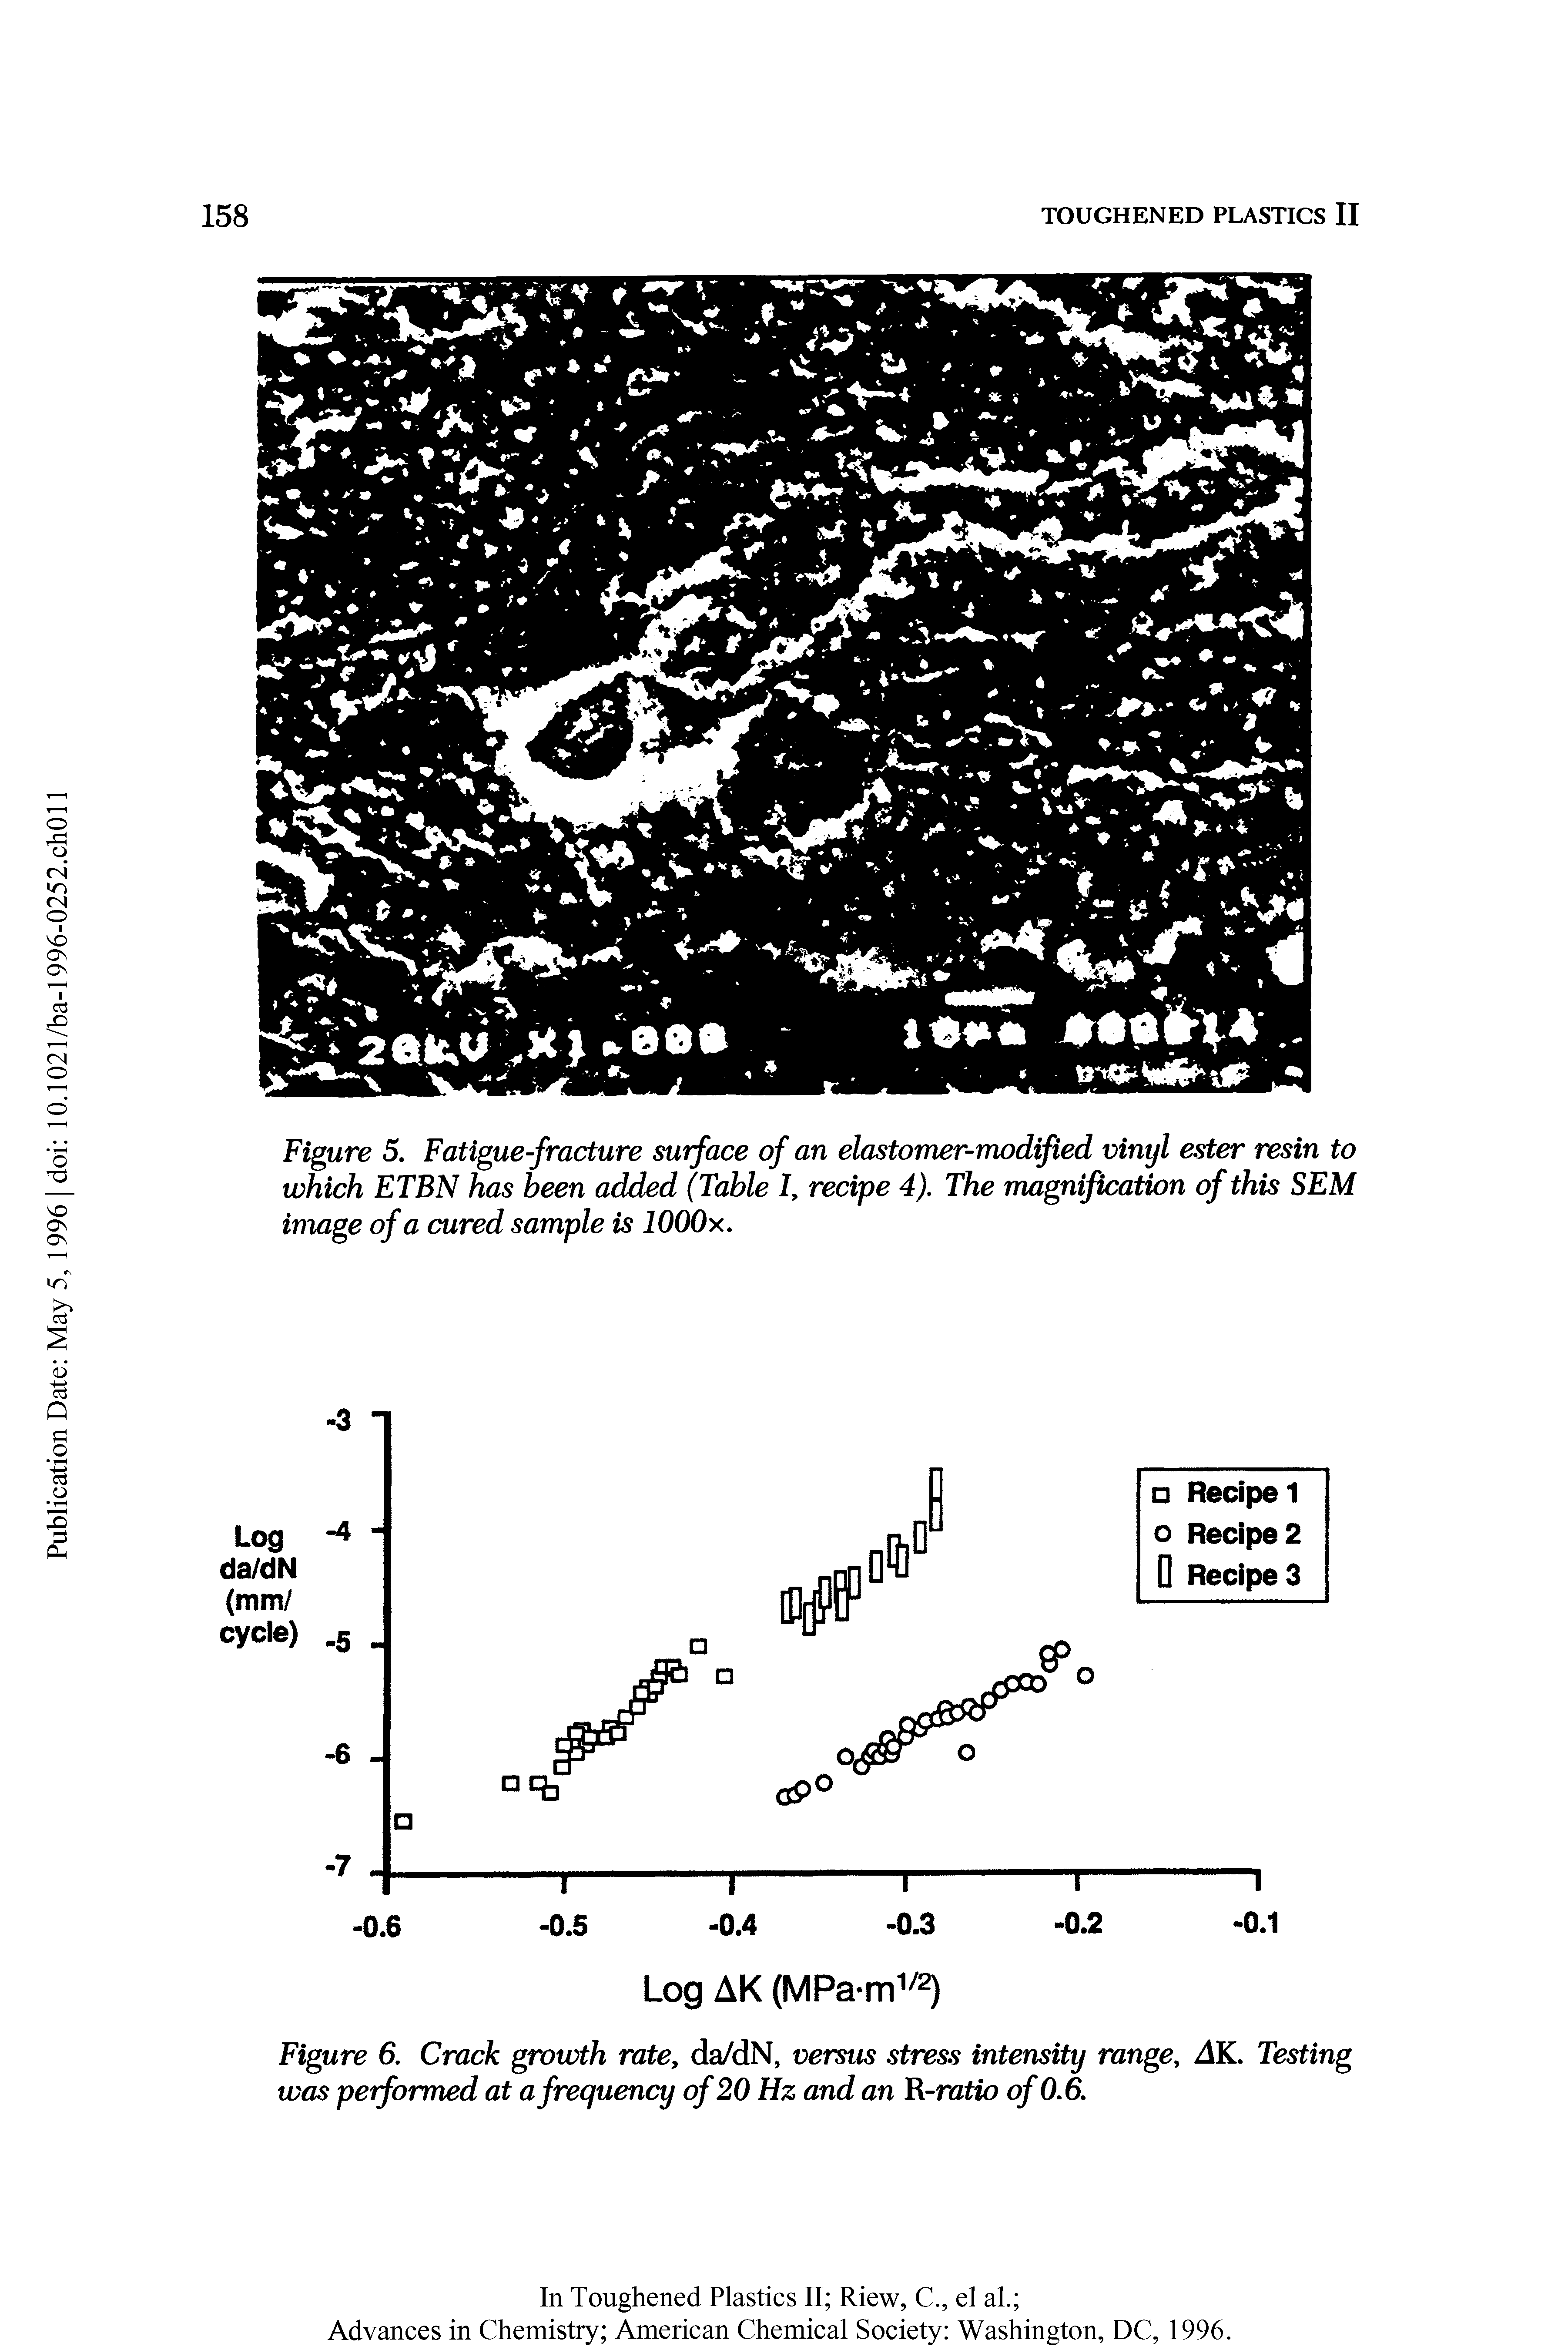 Figure 6. Crack growth rate, da/dN, versus stress intensity range, AK. Testing was performed at a frequency of 20 Hz and an R-ratio of 0.6.